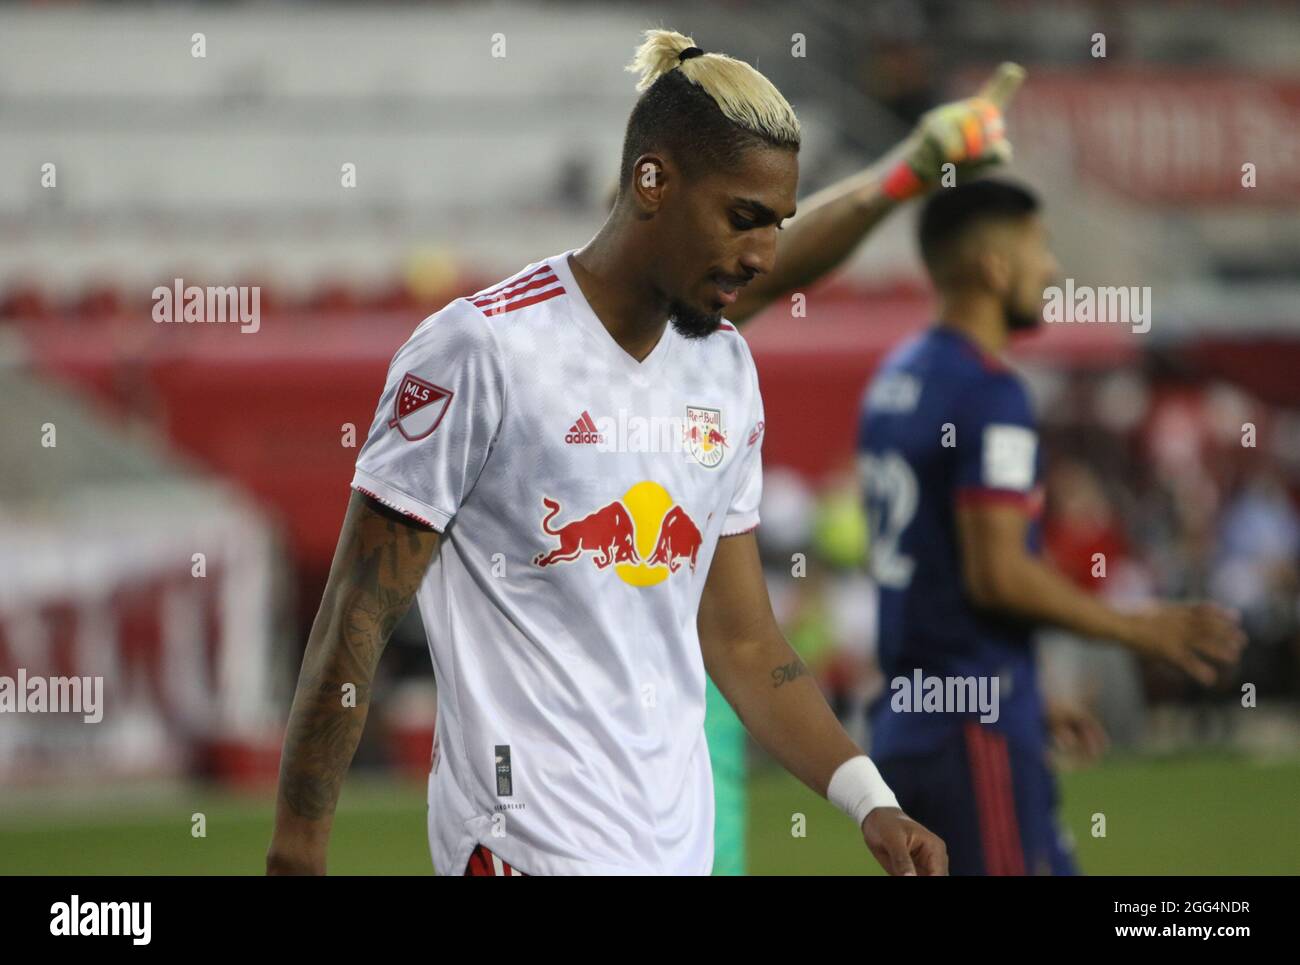 Harrison, United States . 28th Aug, 2021. Fábio Netto (9, NY Red Bulls) during the Major League Soccer game between New York Red Bulls and Chicago Fire FC at Red Bull Arena in Harrison, New Jersey. Credit: SPP Sport Press Photo. /Alamy Live News Stock Photo